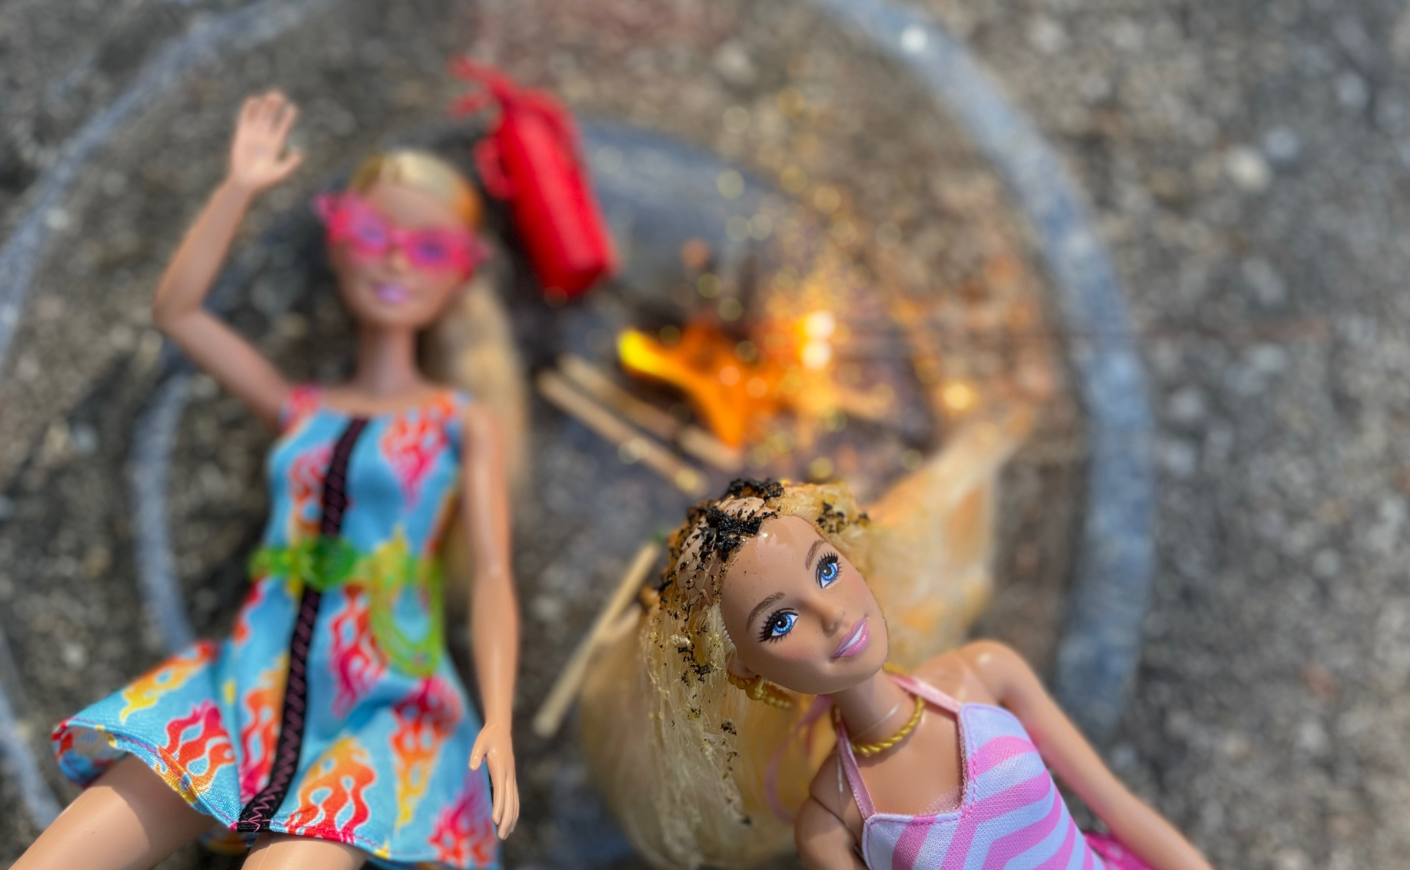 A pair of charred Barbies next to matches and a flame